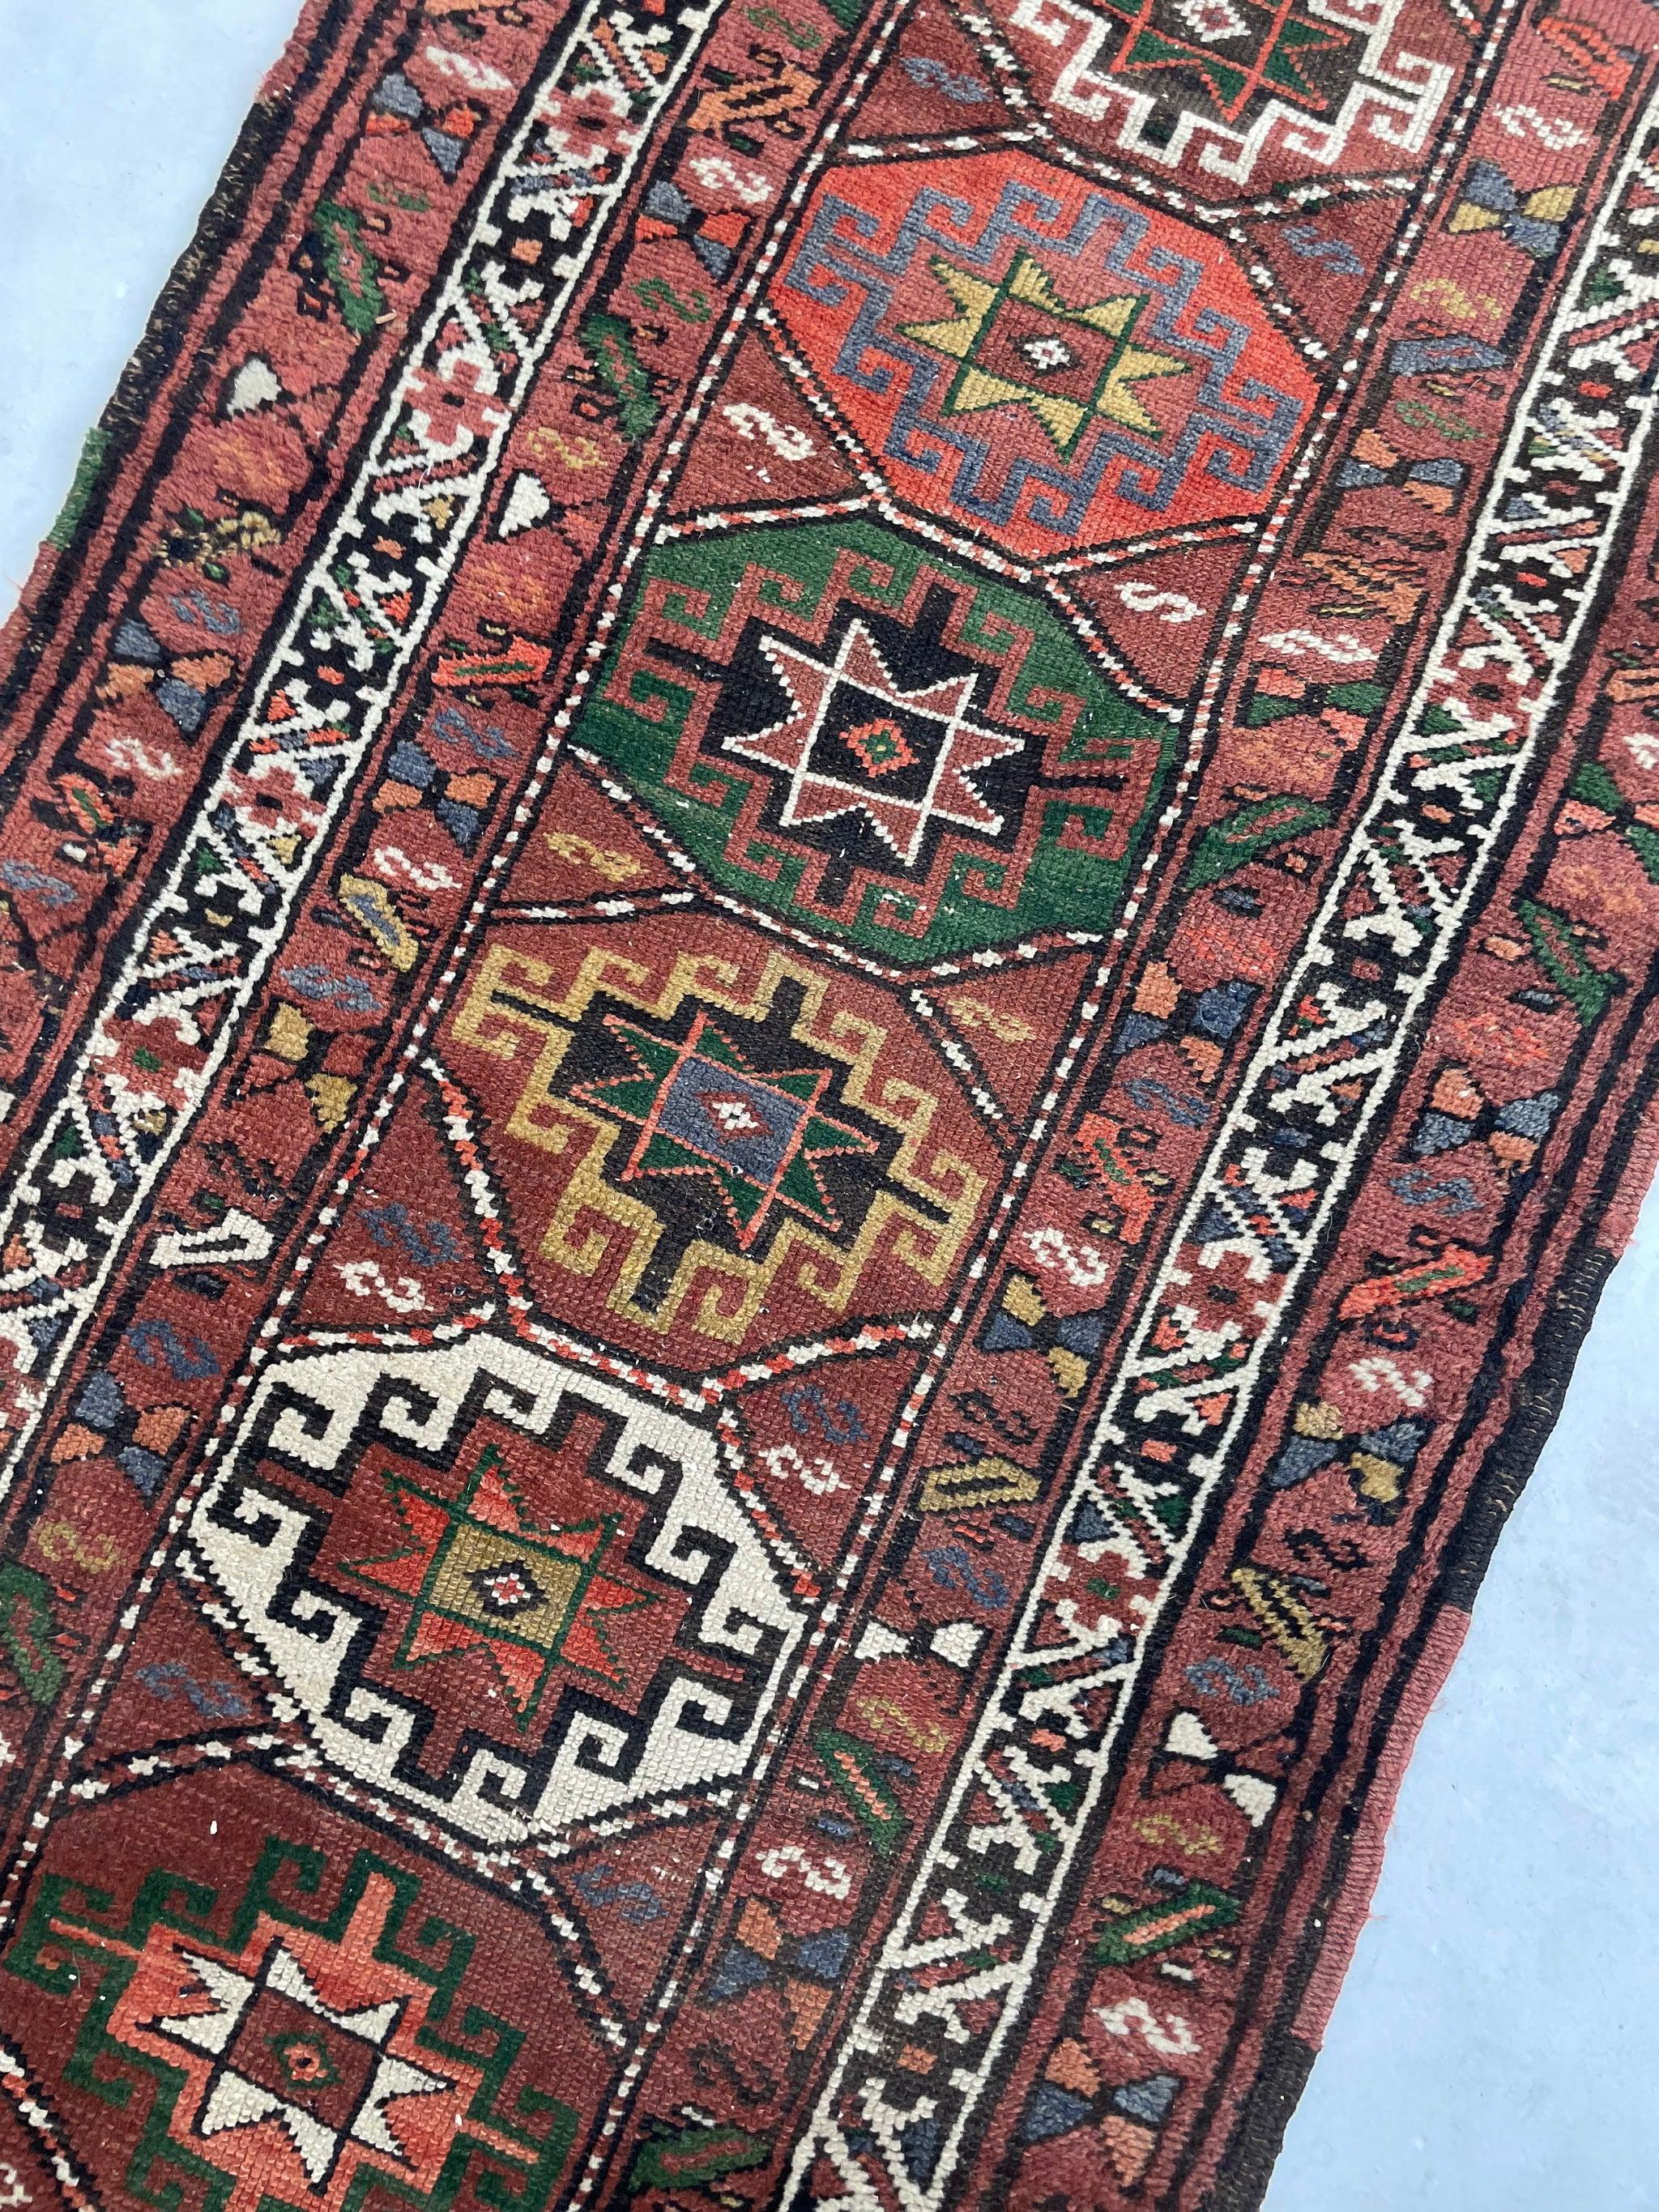 Plush Vintage Runner  Earthy Clay, Terracotta With Incredible Grassy Greens Persimmon, More

About: Magnificent tribal rug with the caucasian design running up the entire rug - these geometric medallion motifs date way back, so it's lovely to see